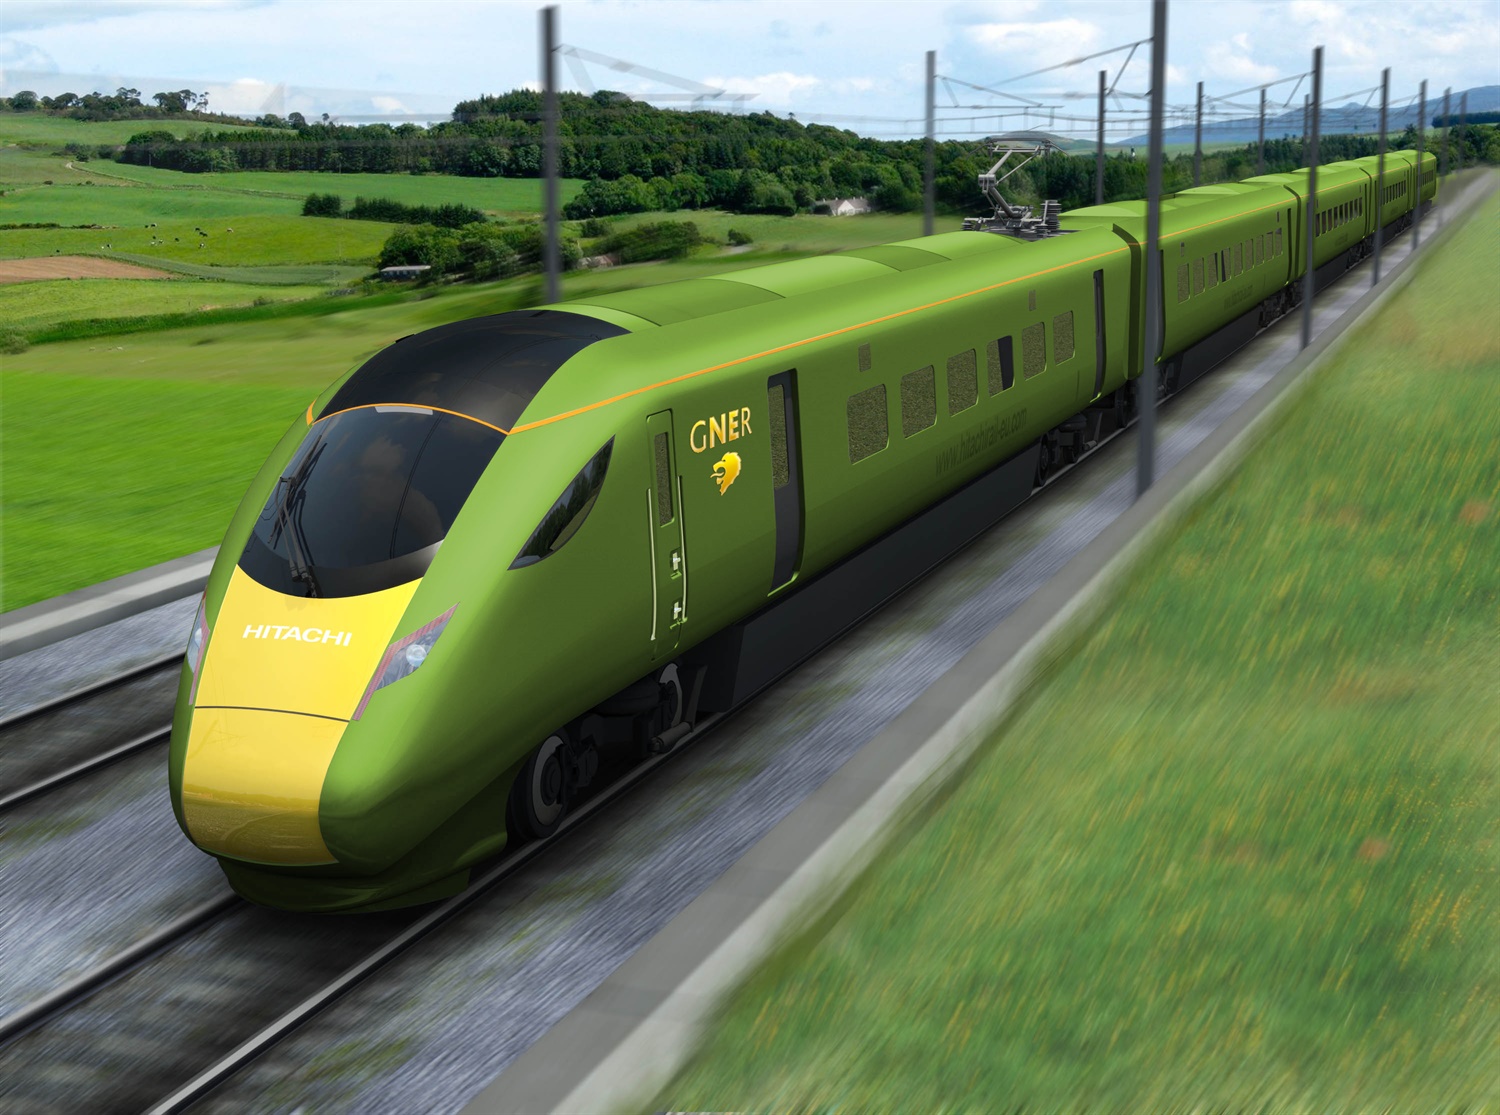 ORR to decide on Alliance Rail open access application this summer